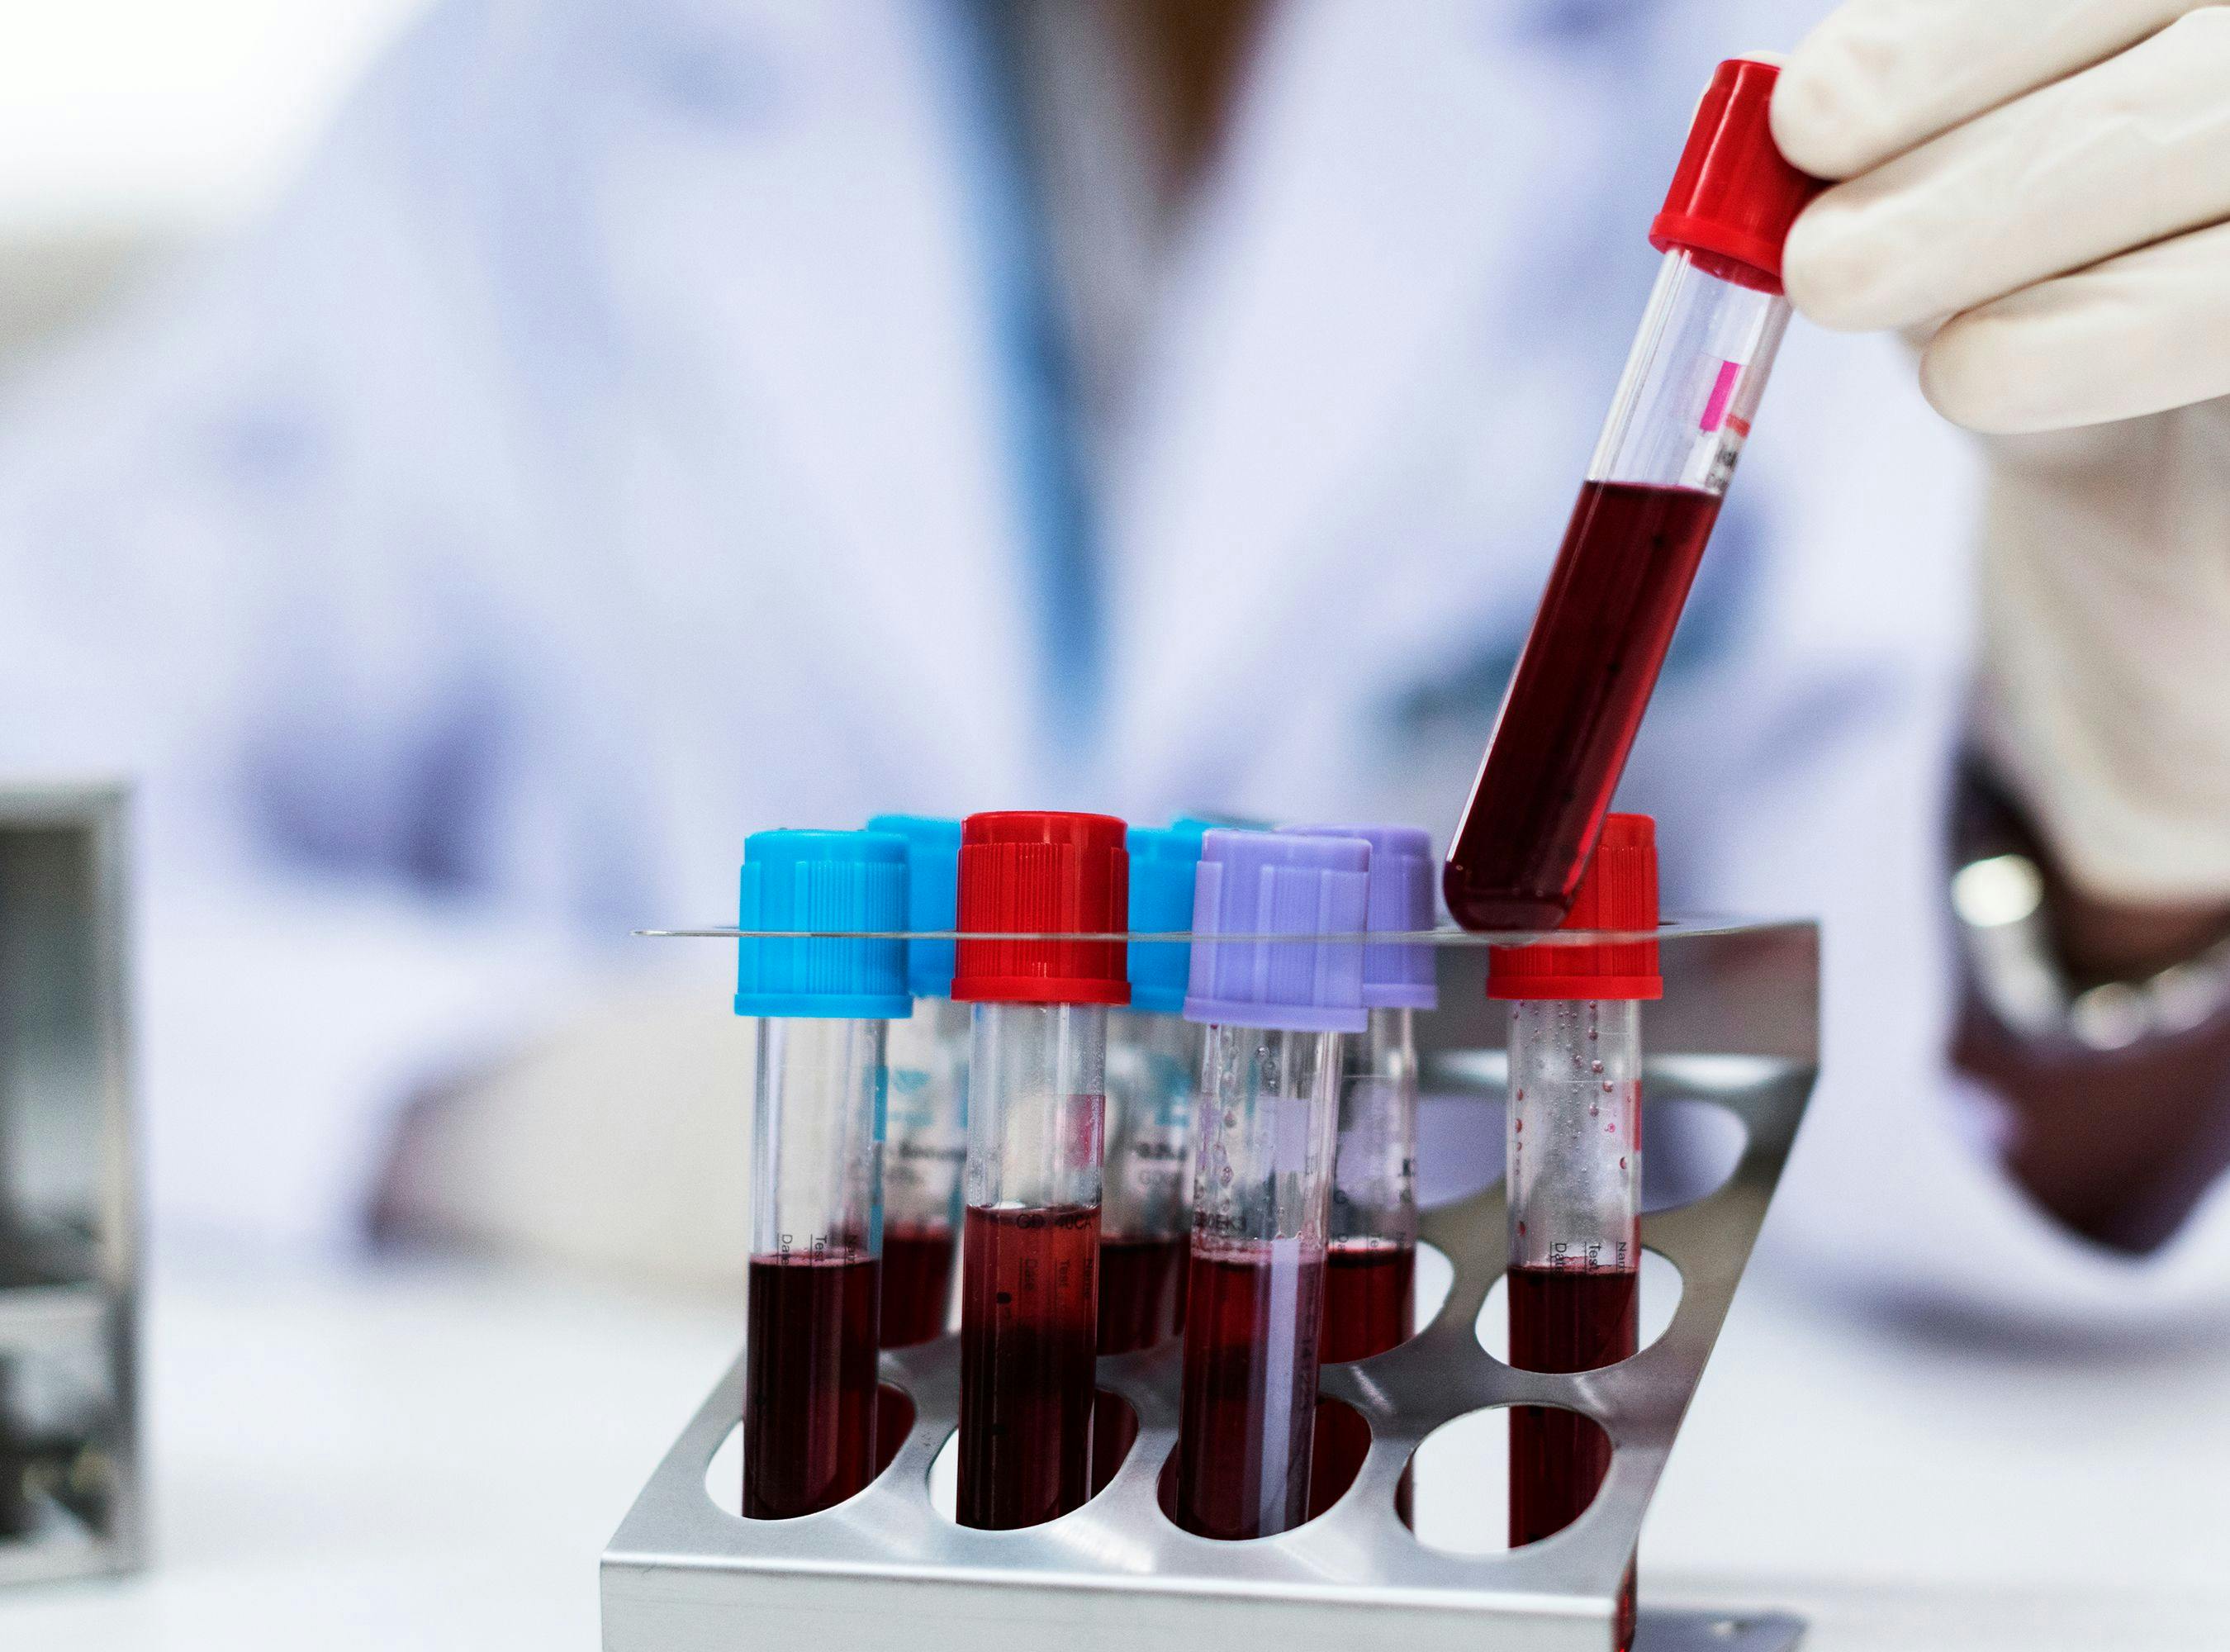 Experienced Pharmacology Expert Excluded For Failing to Determine Accuracy of Blood Test Results